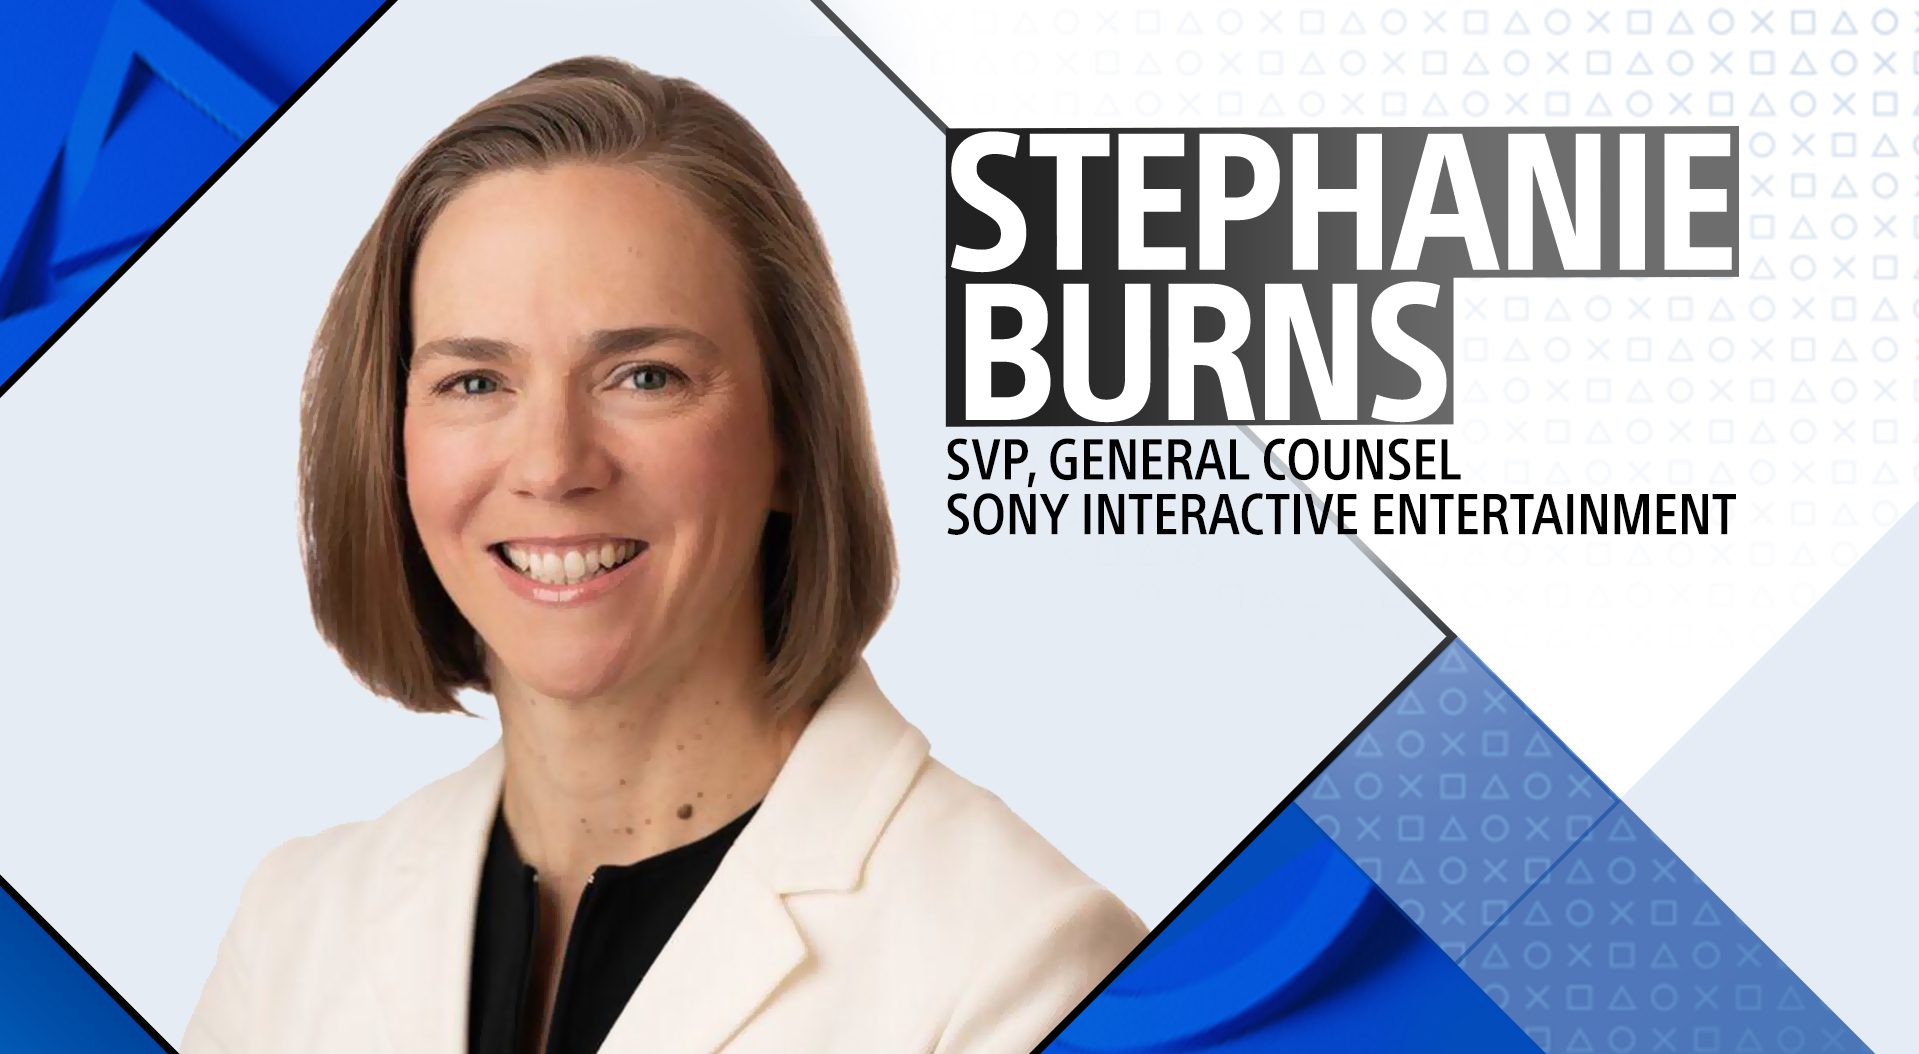 Sony Interactive Entertainment leadership spotlight banner image. Pictured is Stephanie Burns, SVP, General Counsel